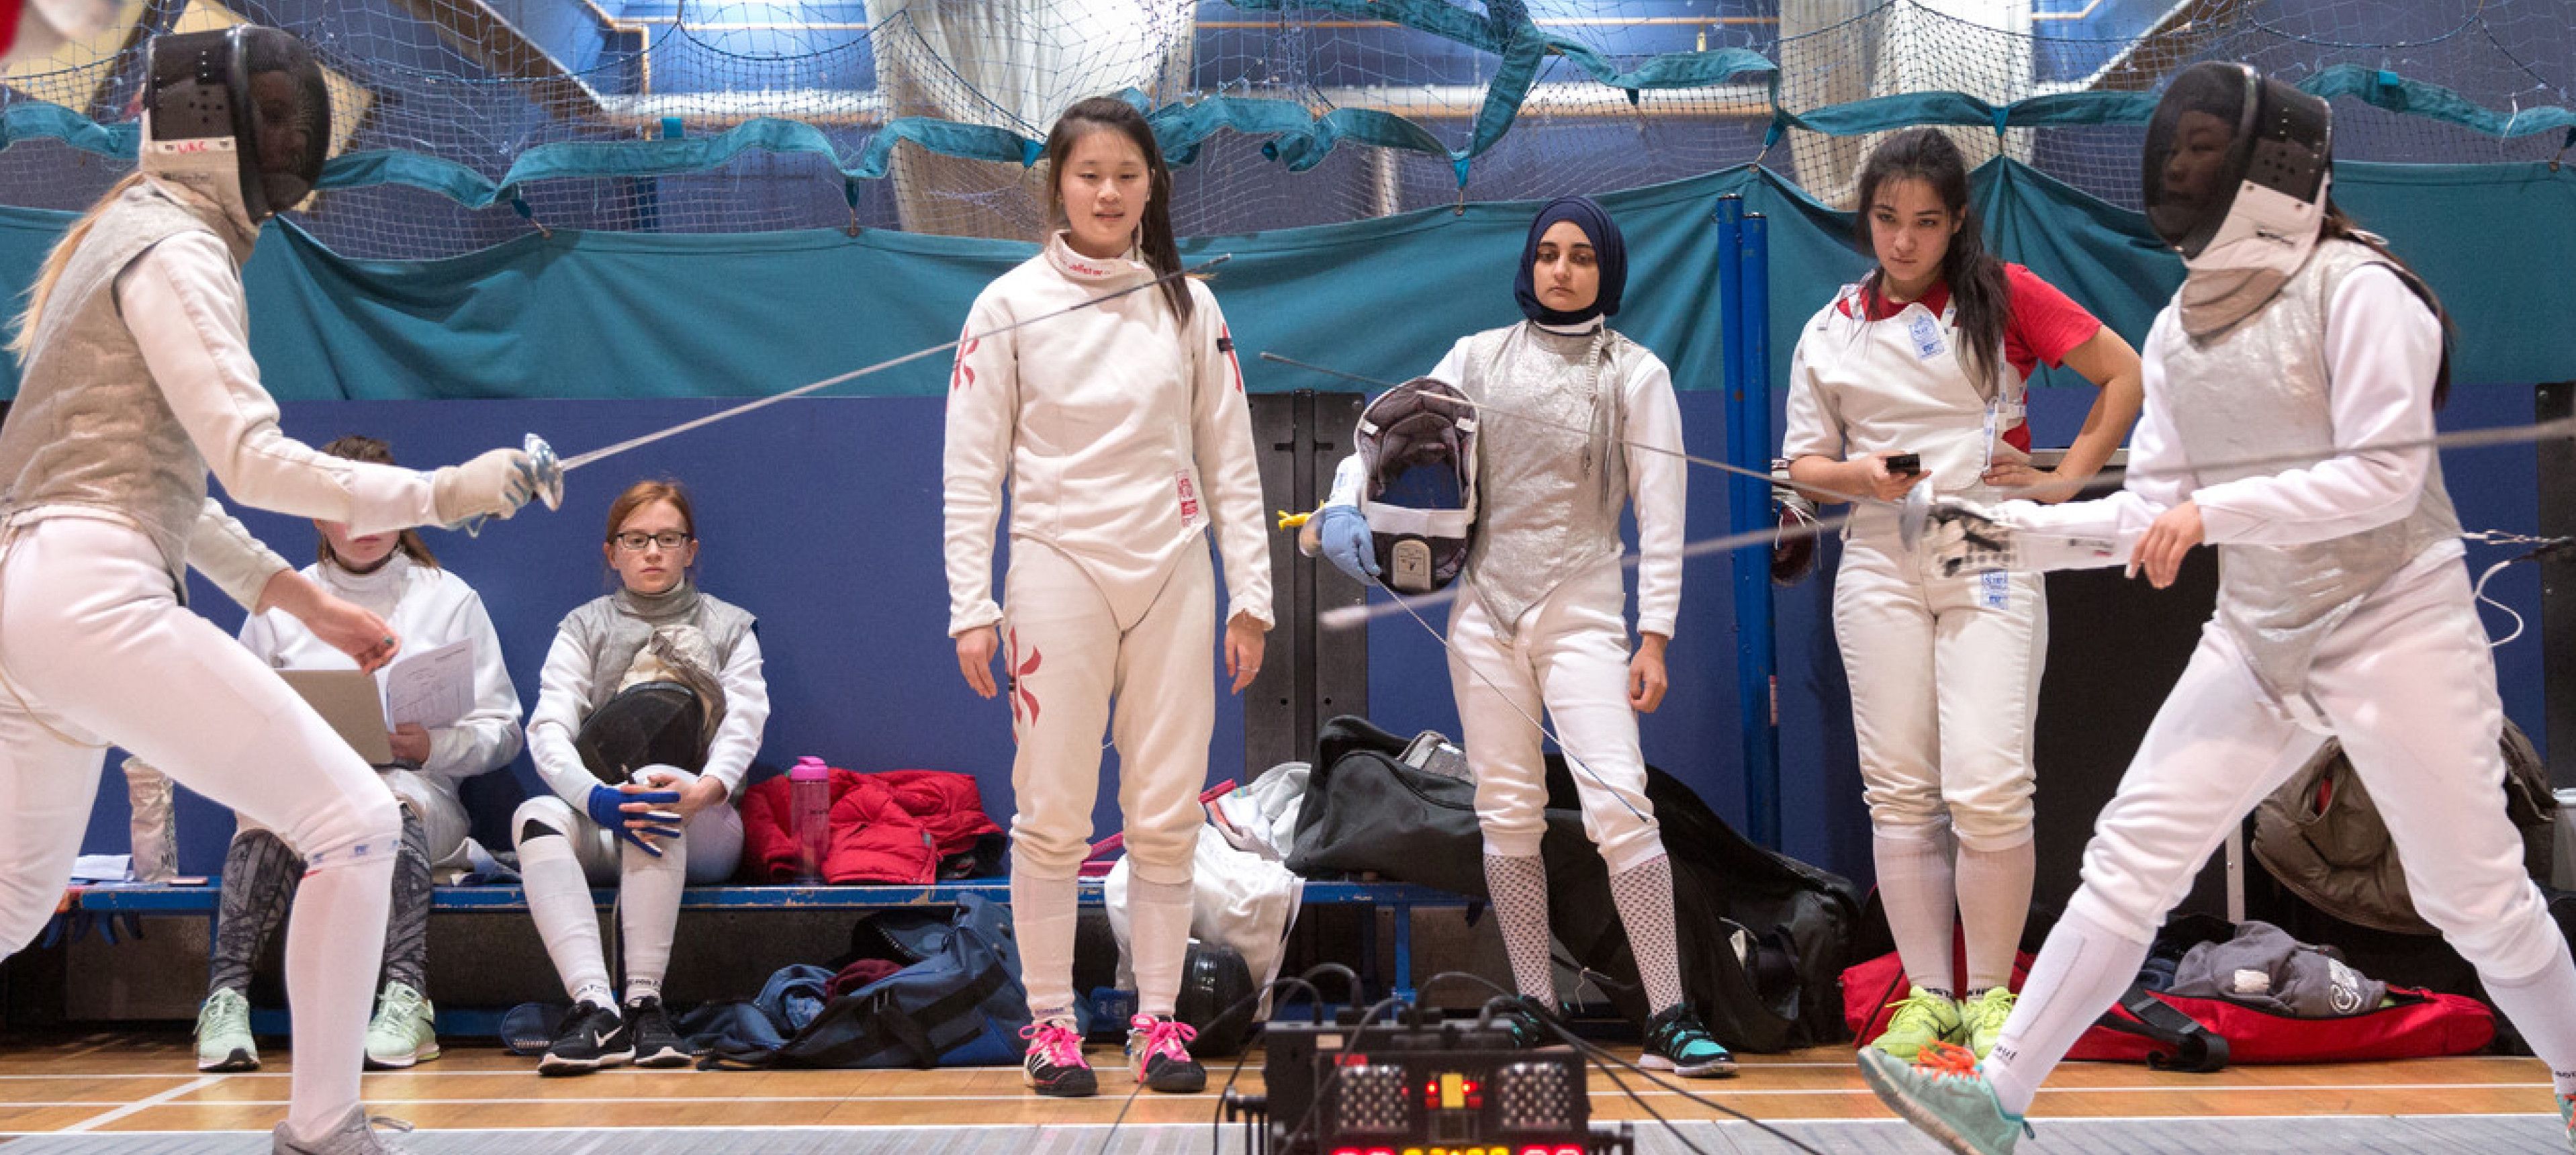 Students participating in a fencing competition in Ethos sports centre